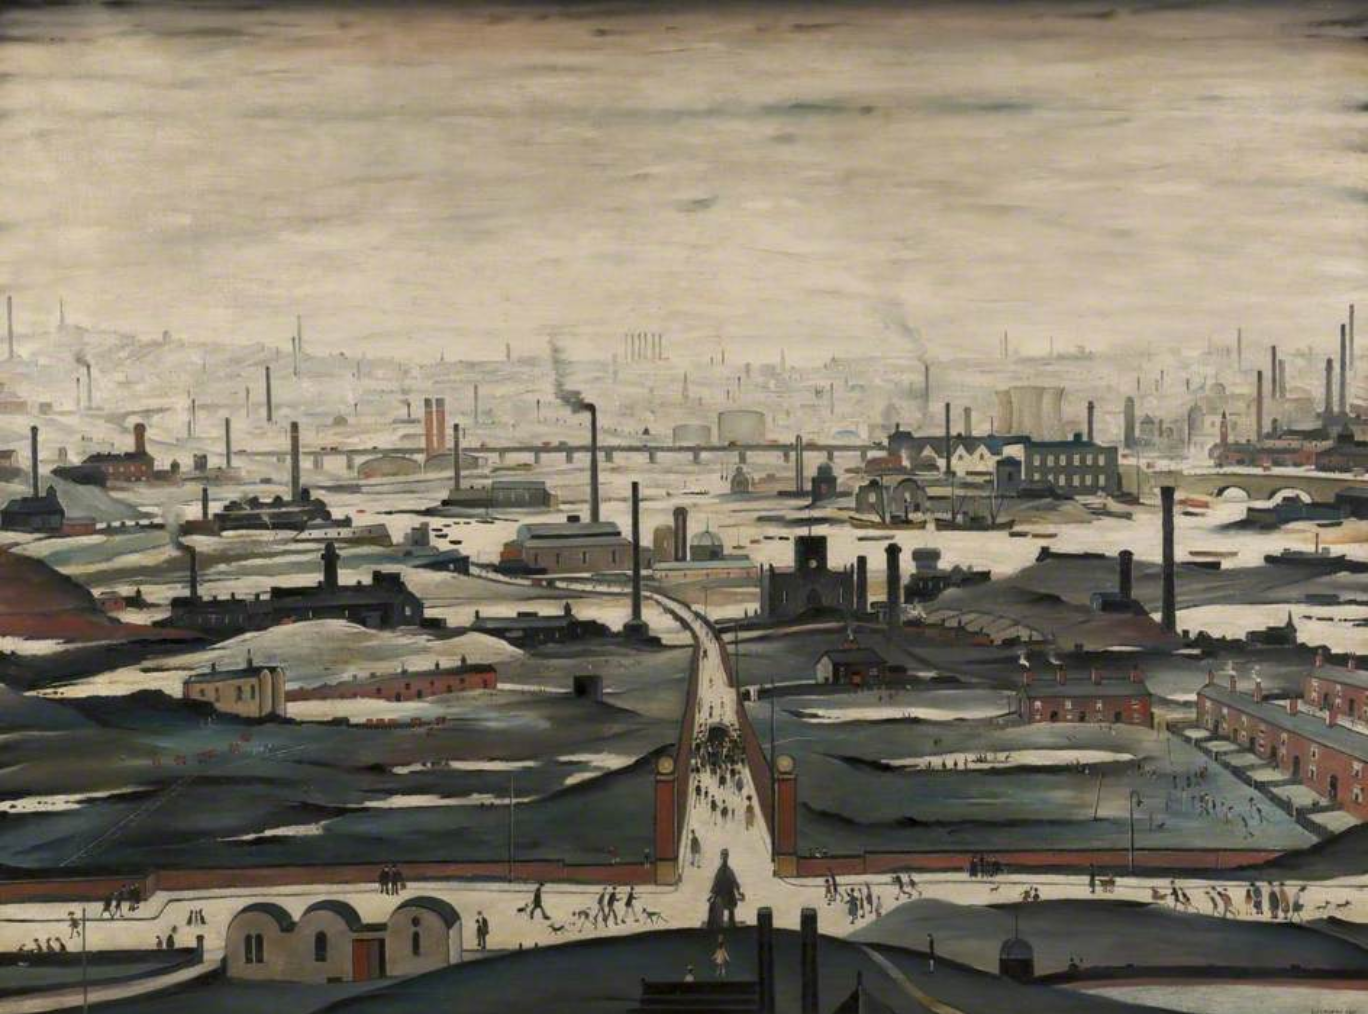 Industrial Landscape (1953) by Laurence Stephen Lowry (1887 - 1976), English artist.